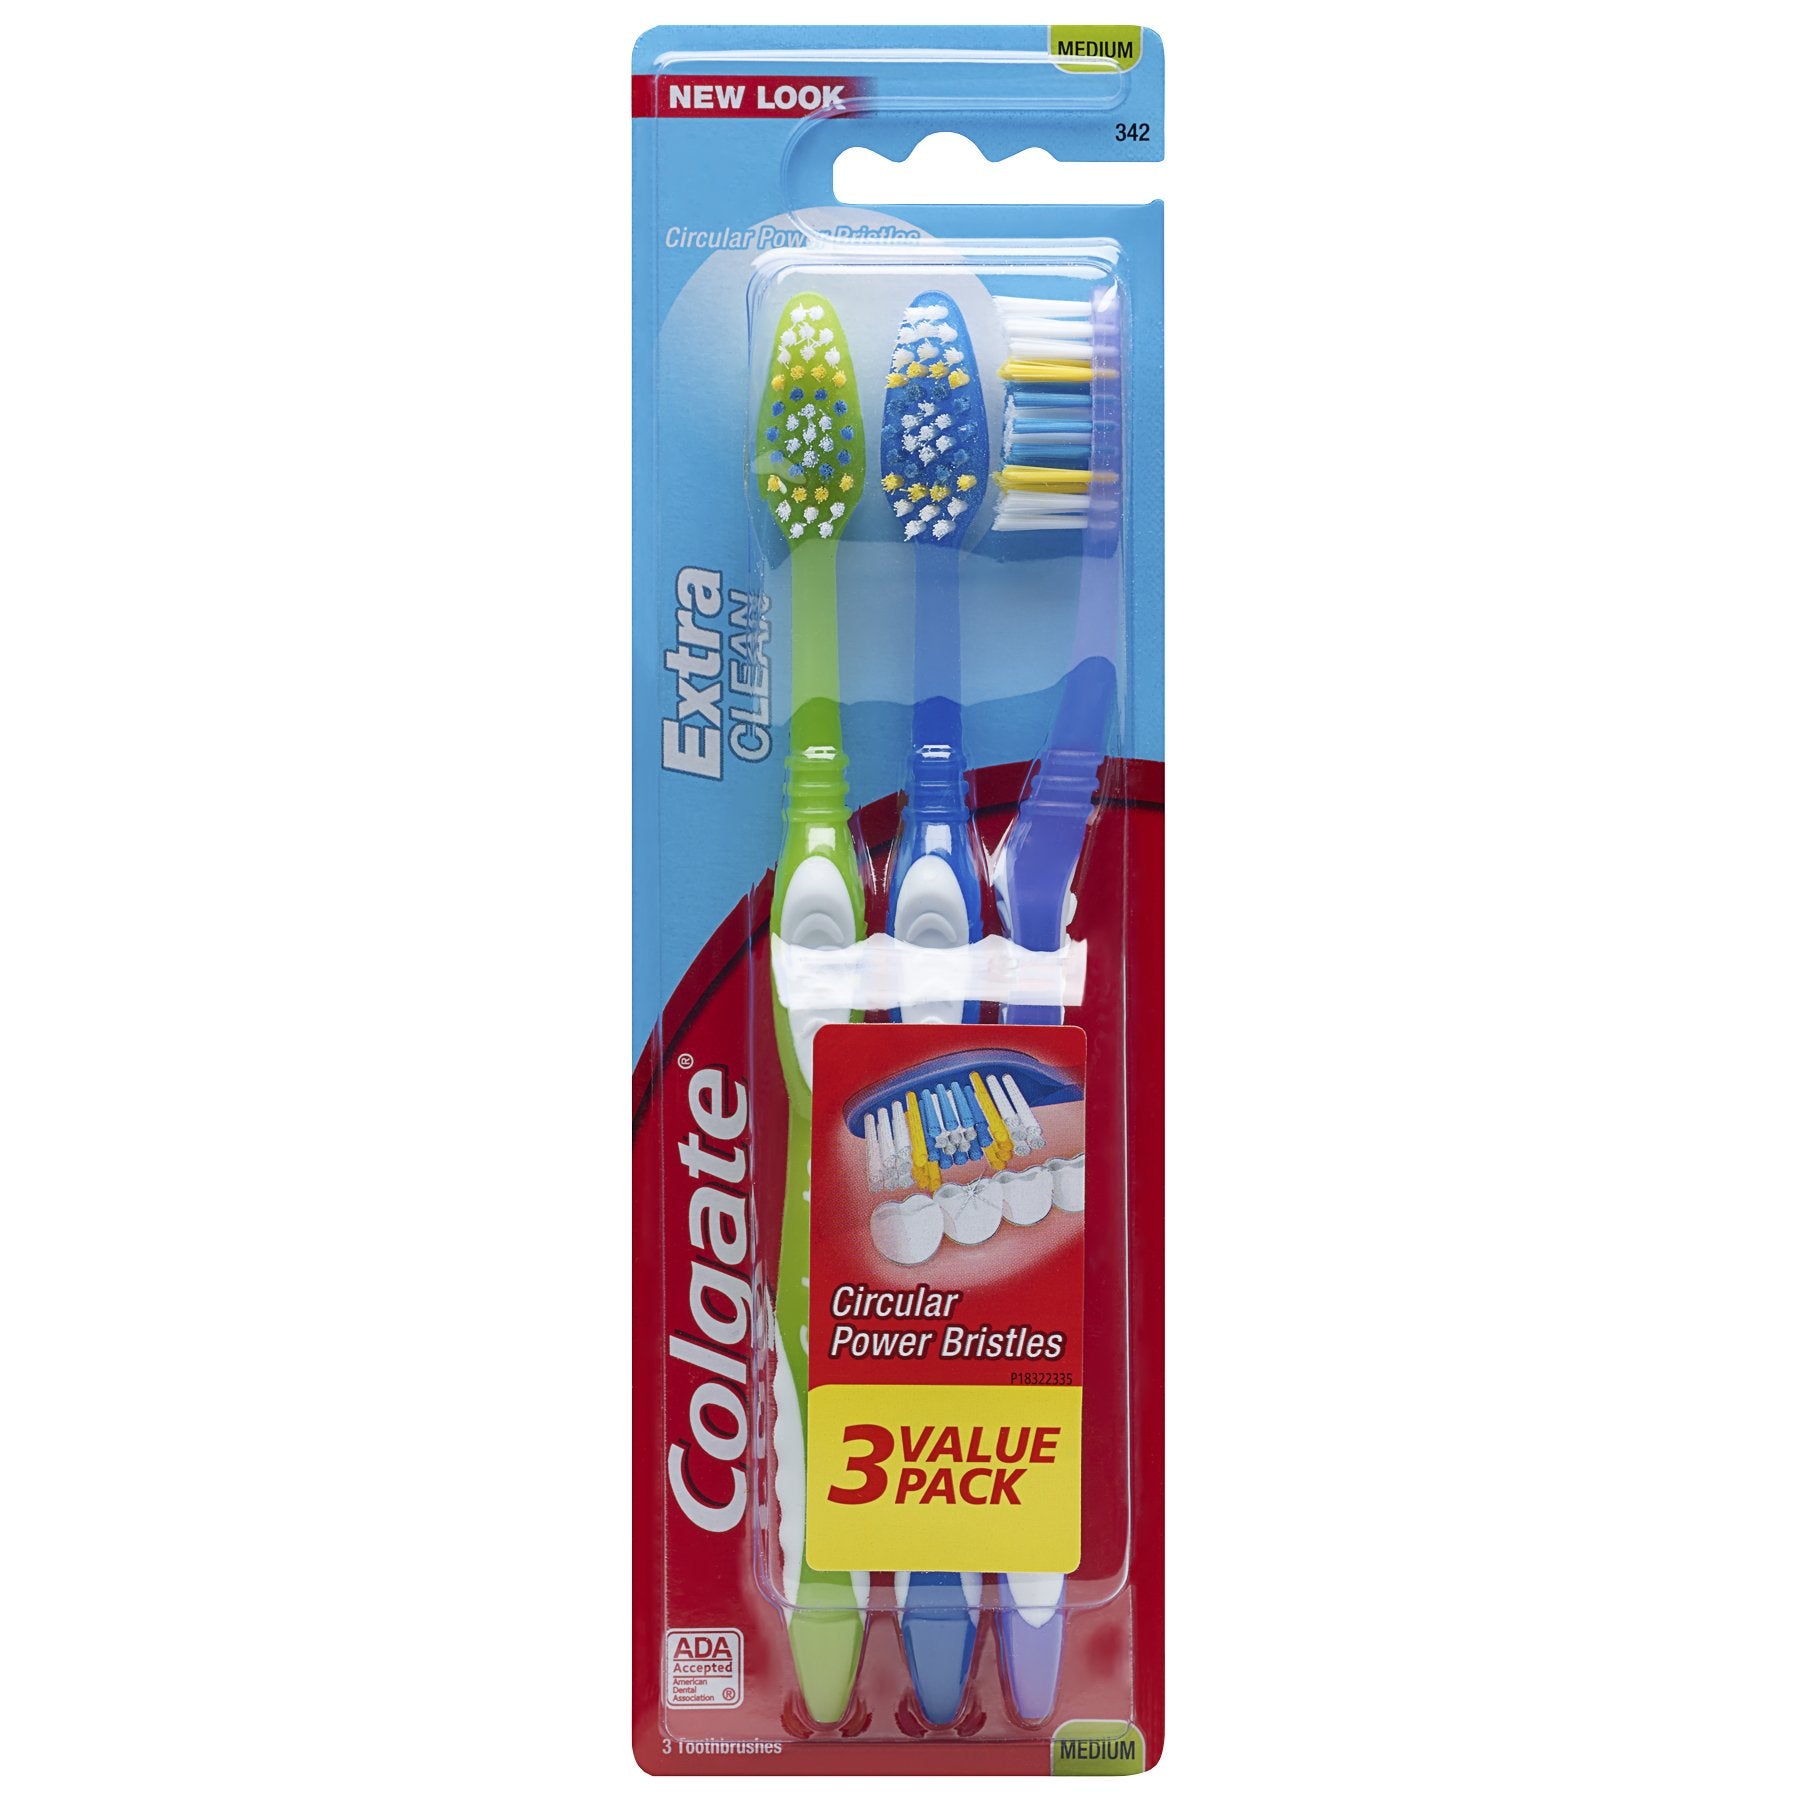 Colgate Extra Clean Full Head Toothbrush, Medium - 3 Count (Pack of 1)